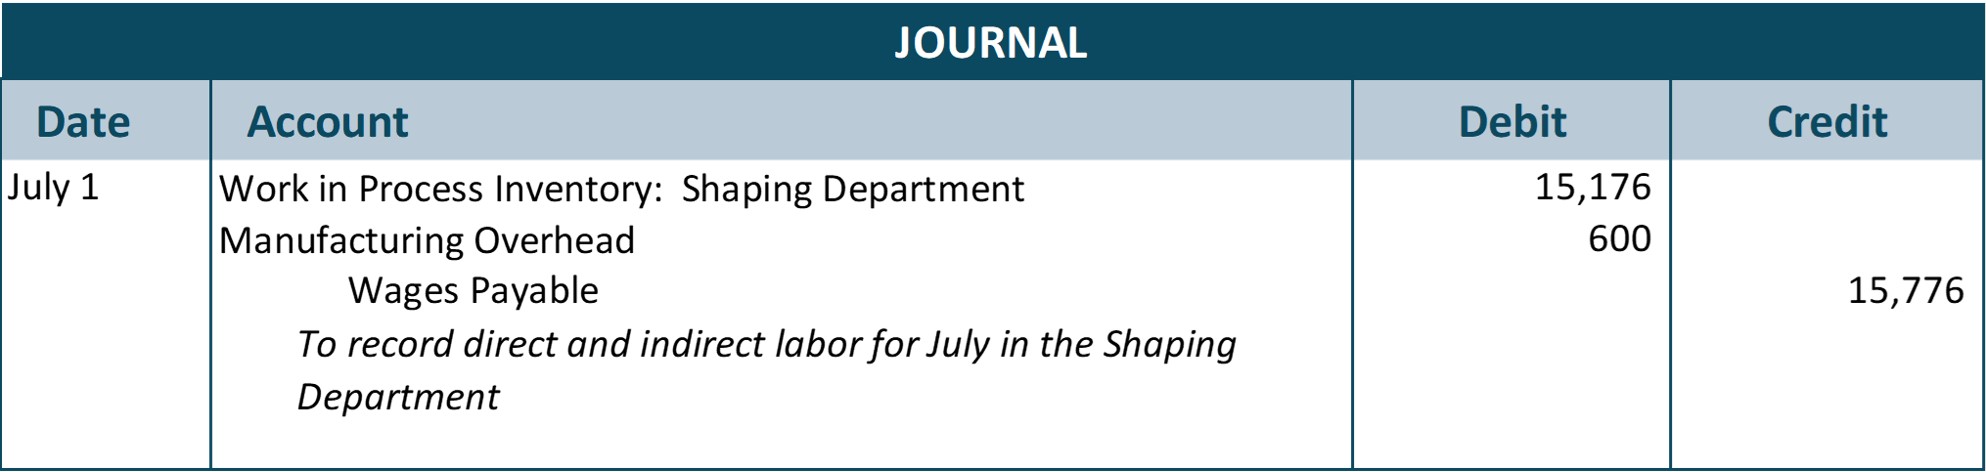 Journal entry for July 1 debiting Work in Process Inventory: Shaping Department 15,176 and Manufacturing Overhead 600, and crediting Wages Payable 15,776. Explanation: To record direct and indirect labor for July in the Shaping Department.